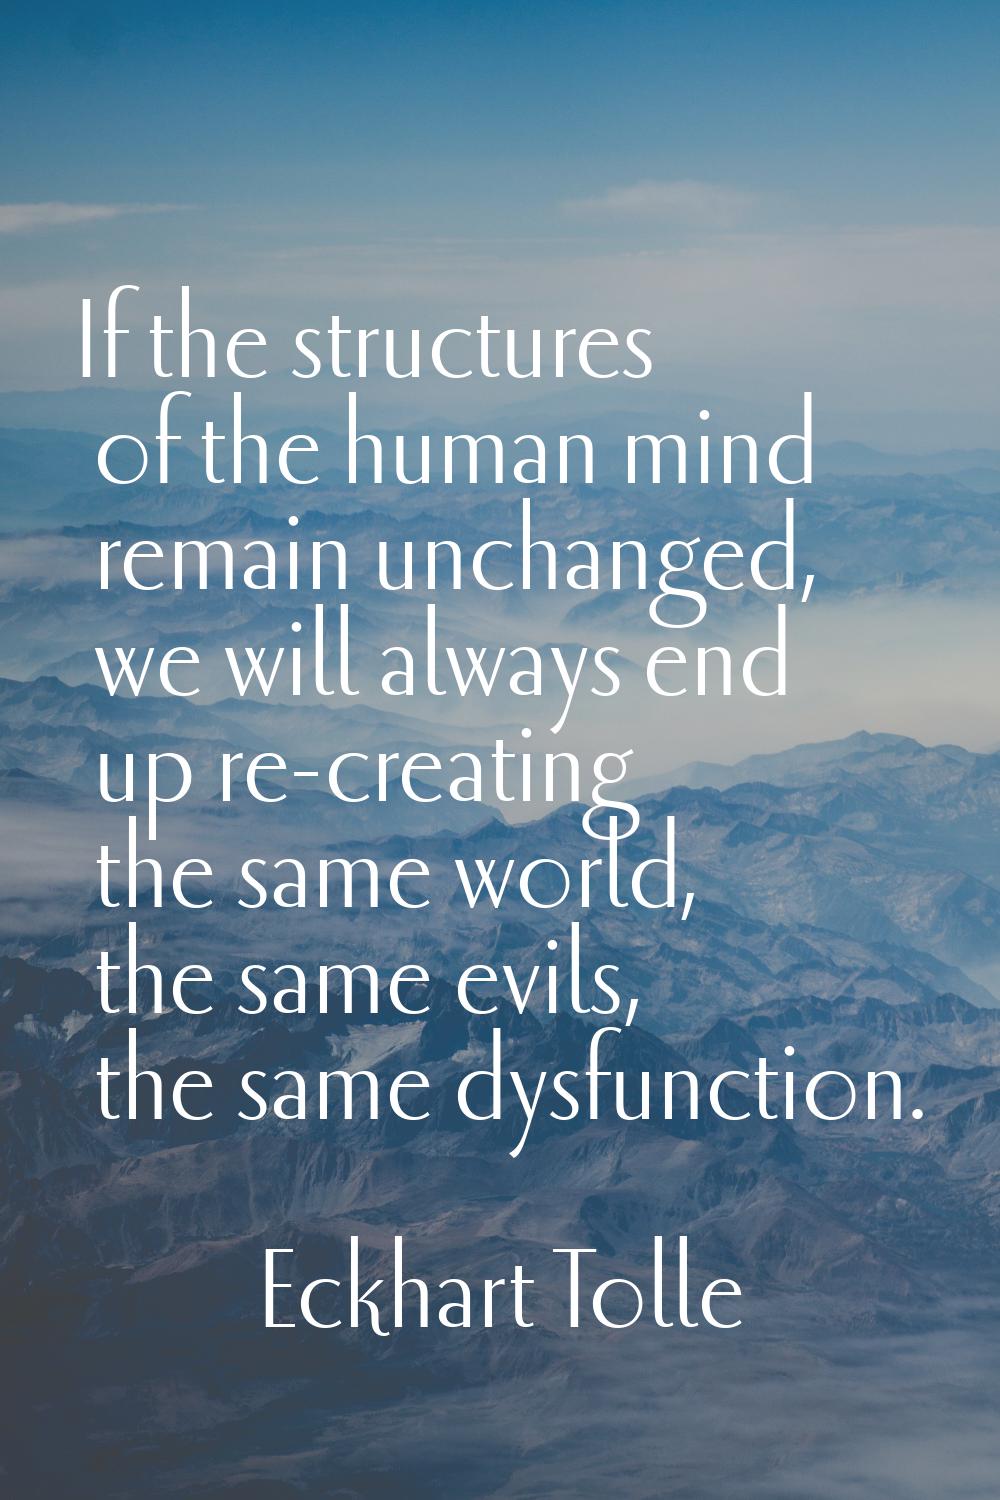 If the structures of the human mind remain unchanged, we will always end up re-creating the same wo